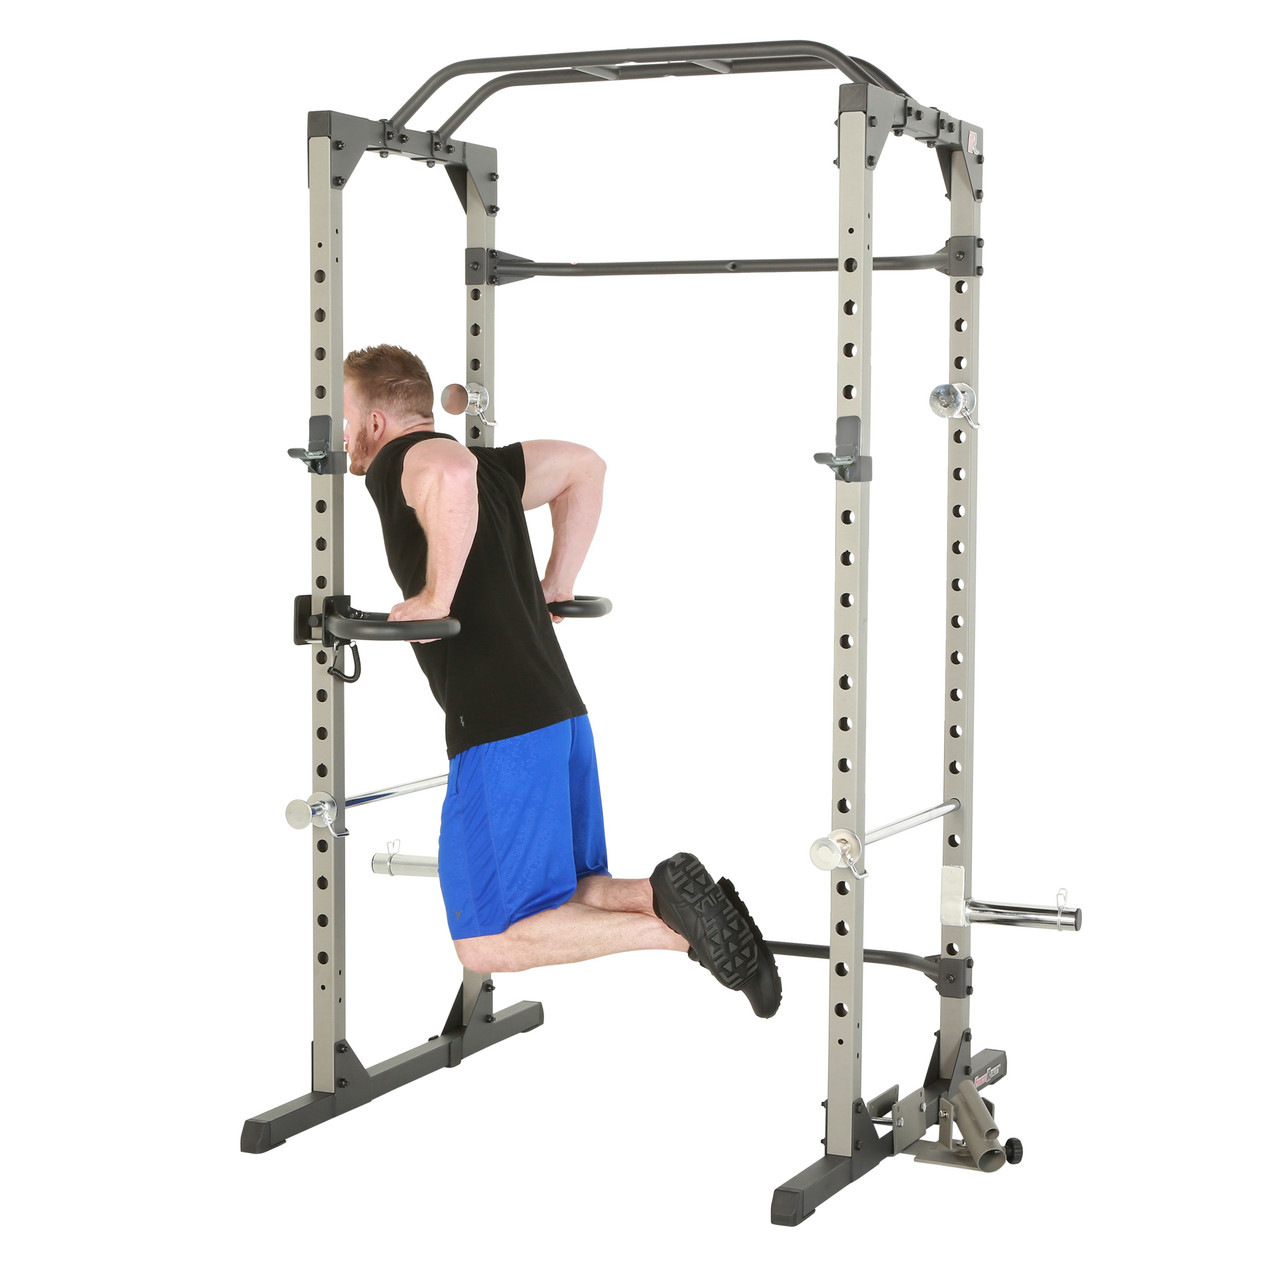 FITNESS REALITY Attachment Set for 2”x2” Steel Tubing Power Cages, Includes  Landmine, Olympic Plate Holder, 2 J-Hooks, and 2 Dip Bars